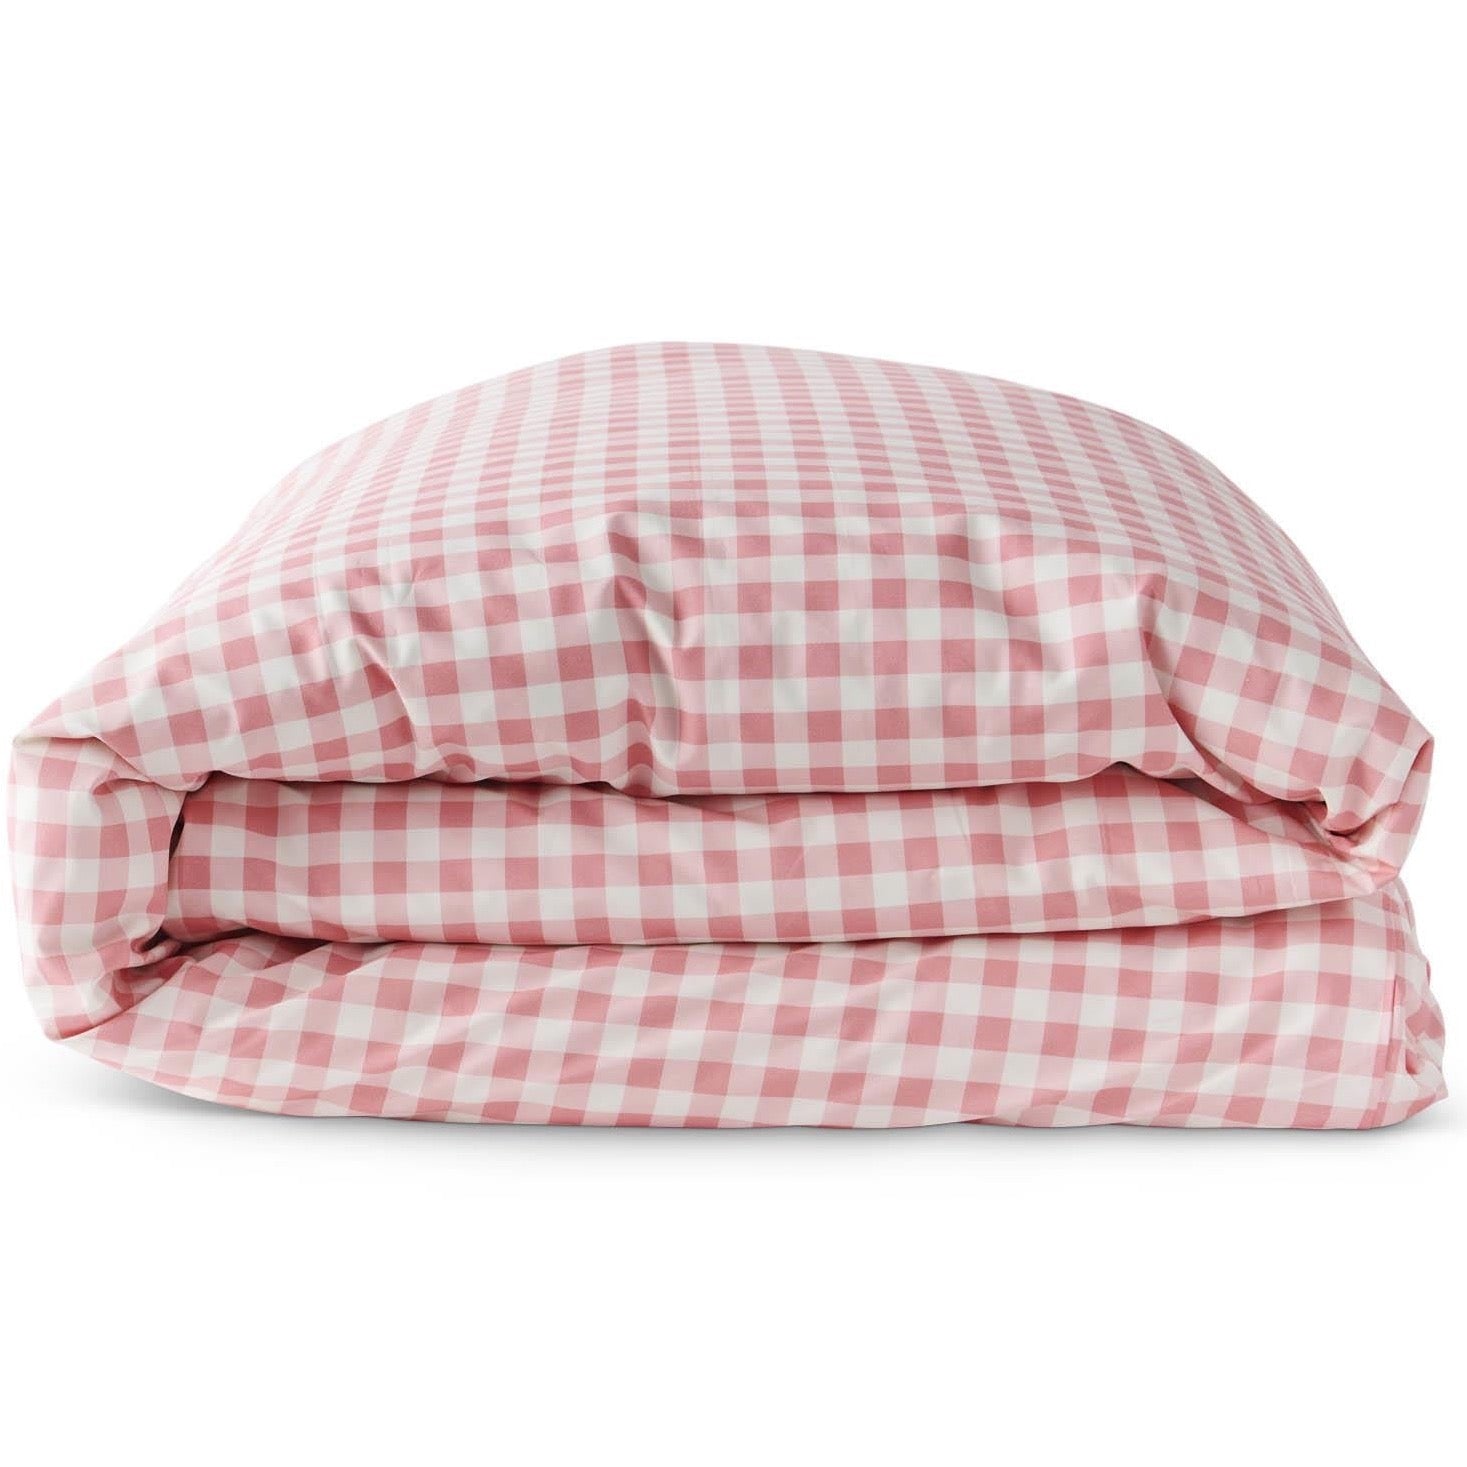 Gingham Candy Organic Cotton Quilt Cover